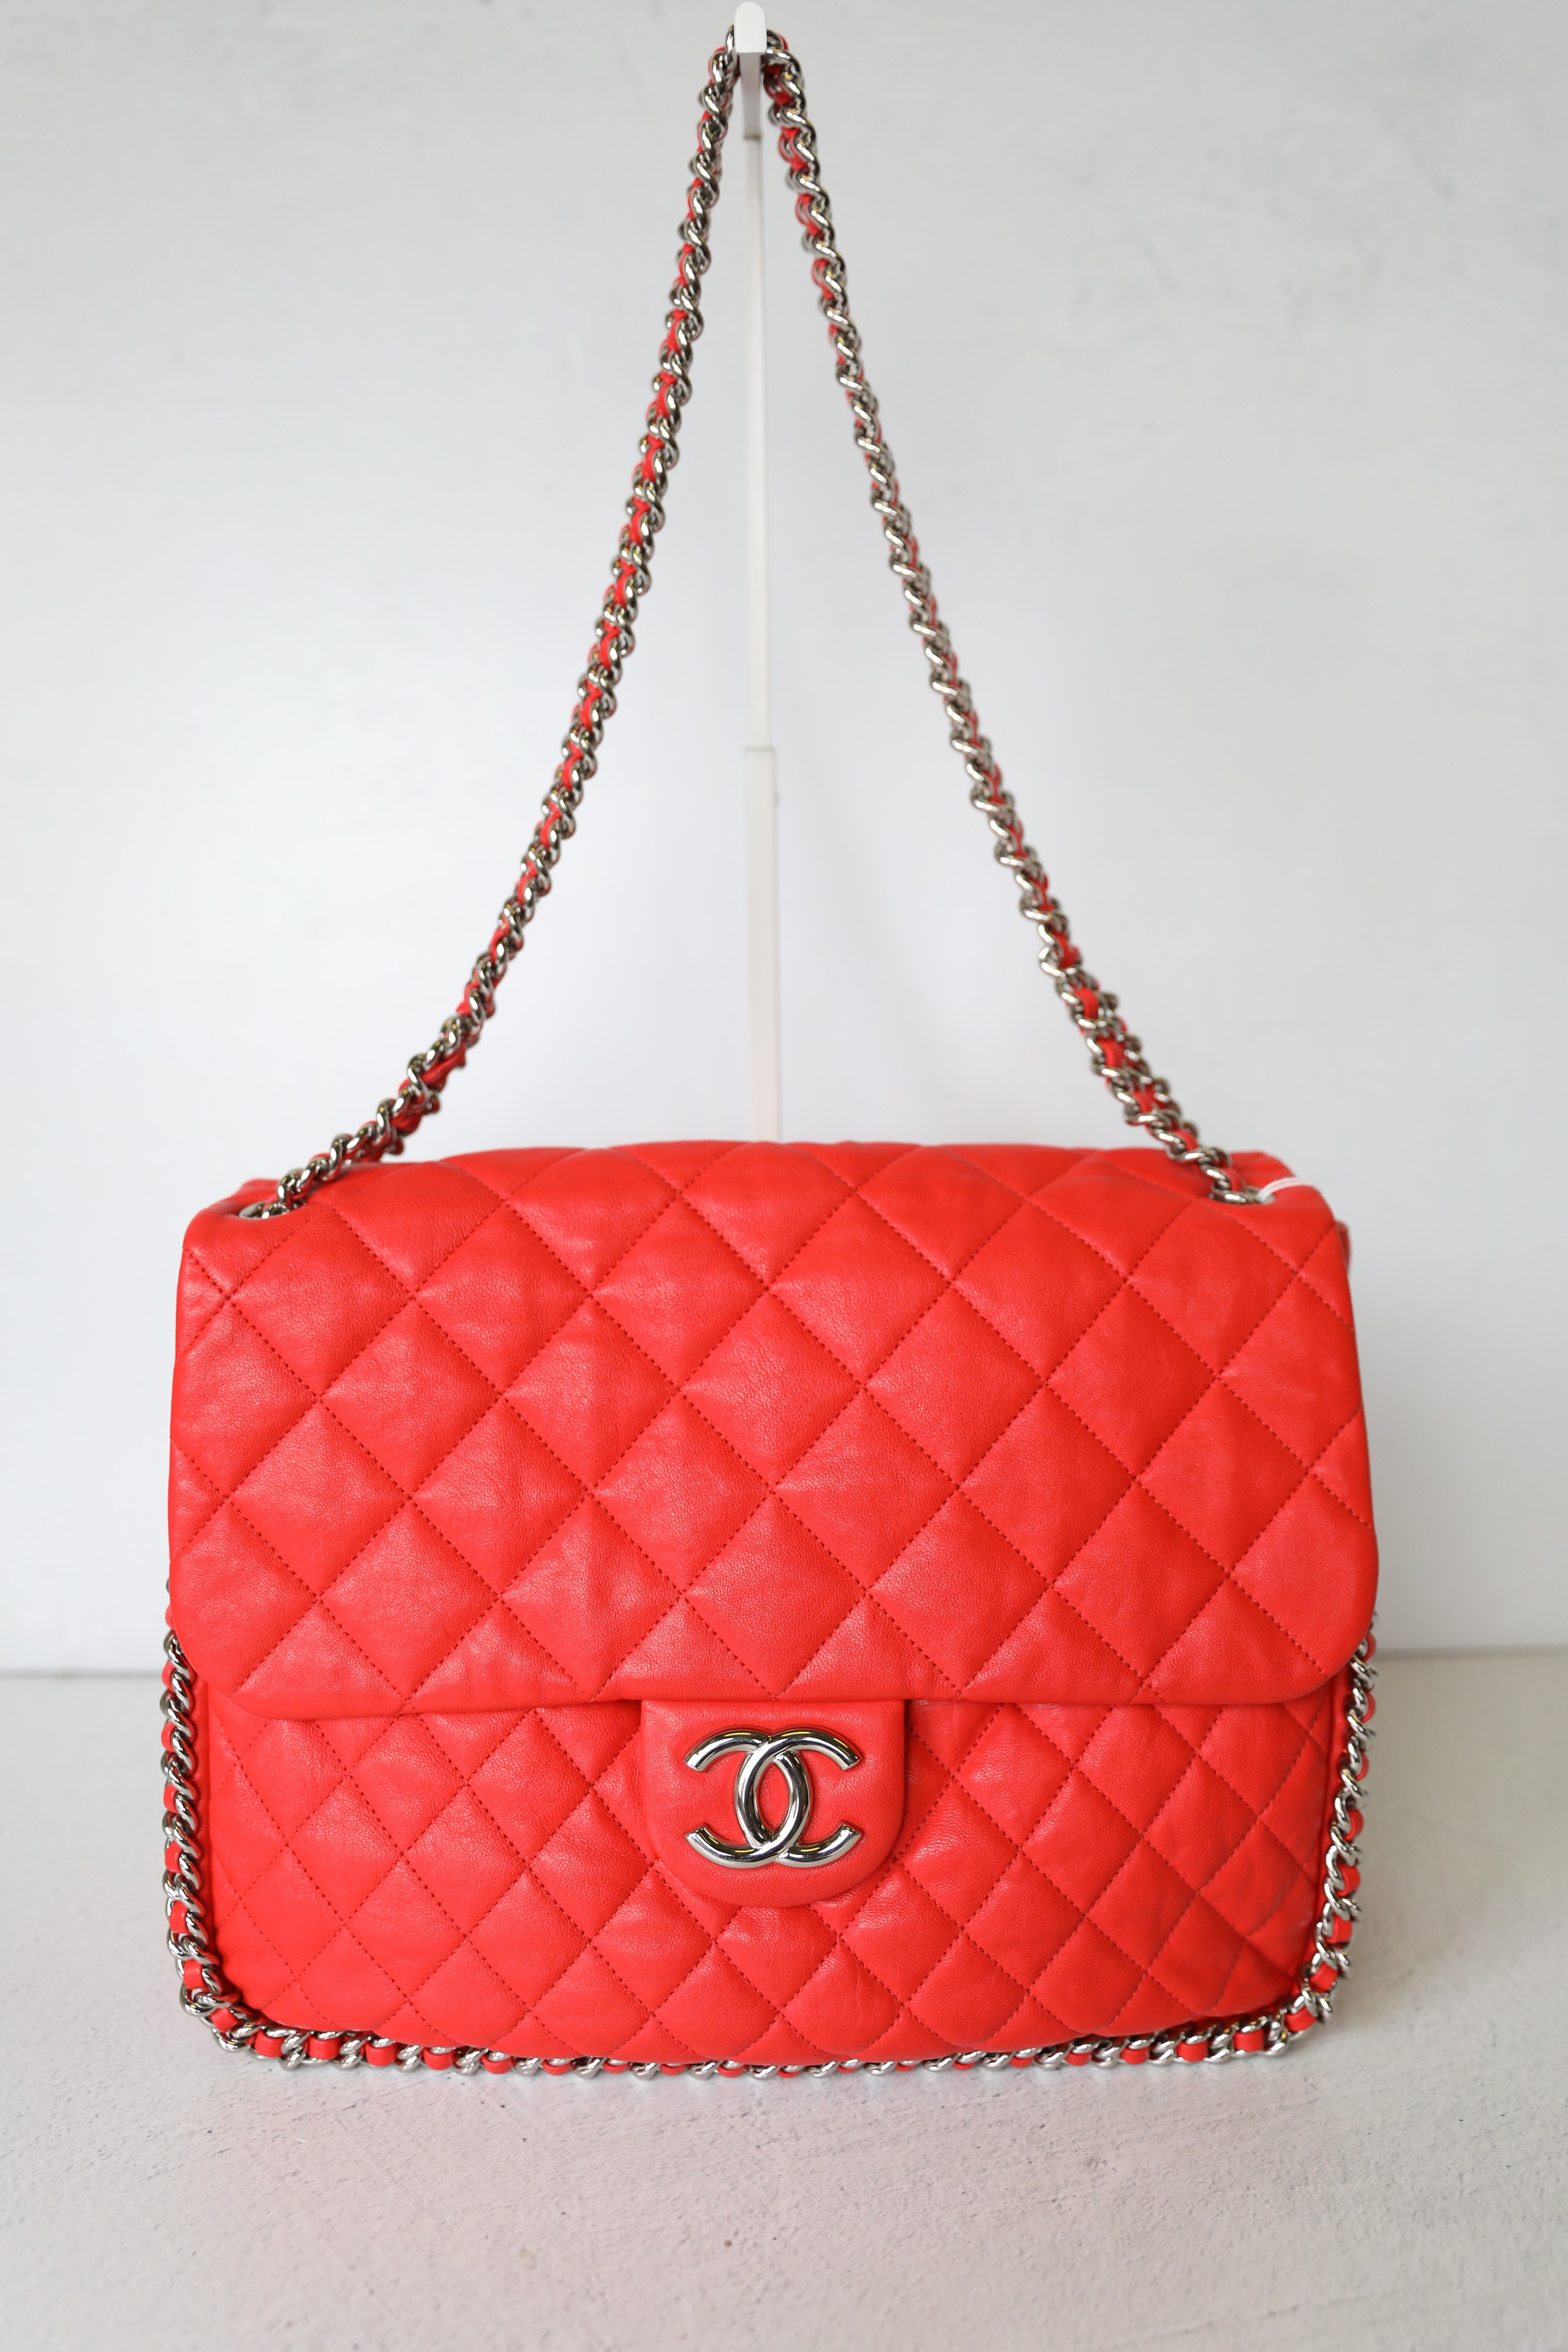 Chanel Red Quilted Caviar Maxi Classic Double Flap Bag